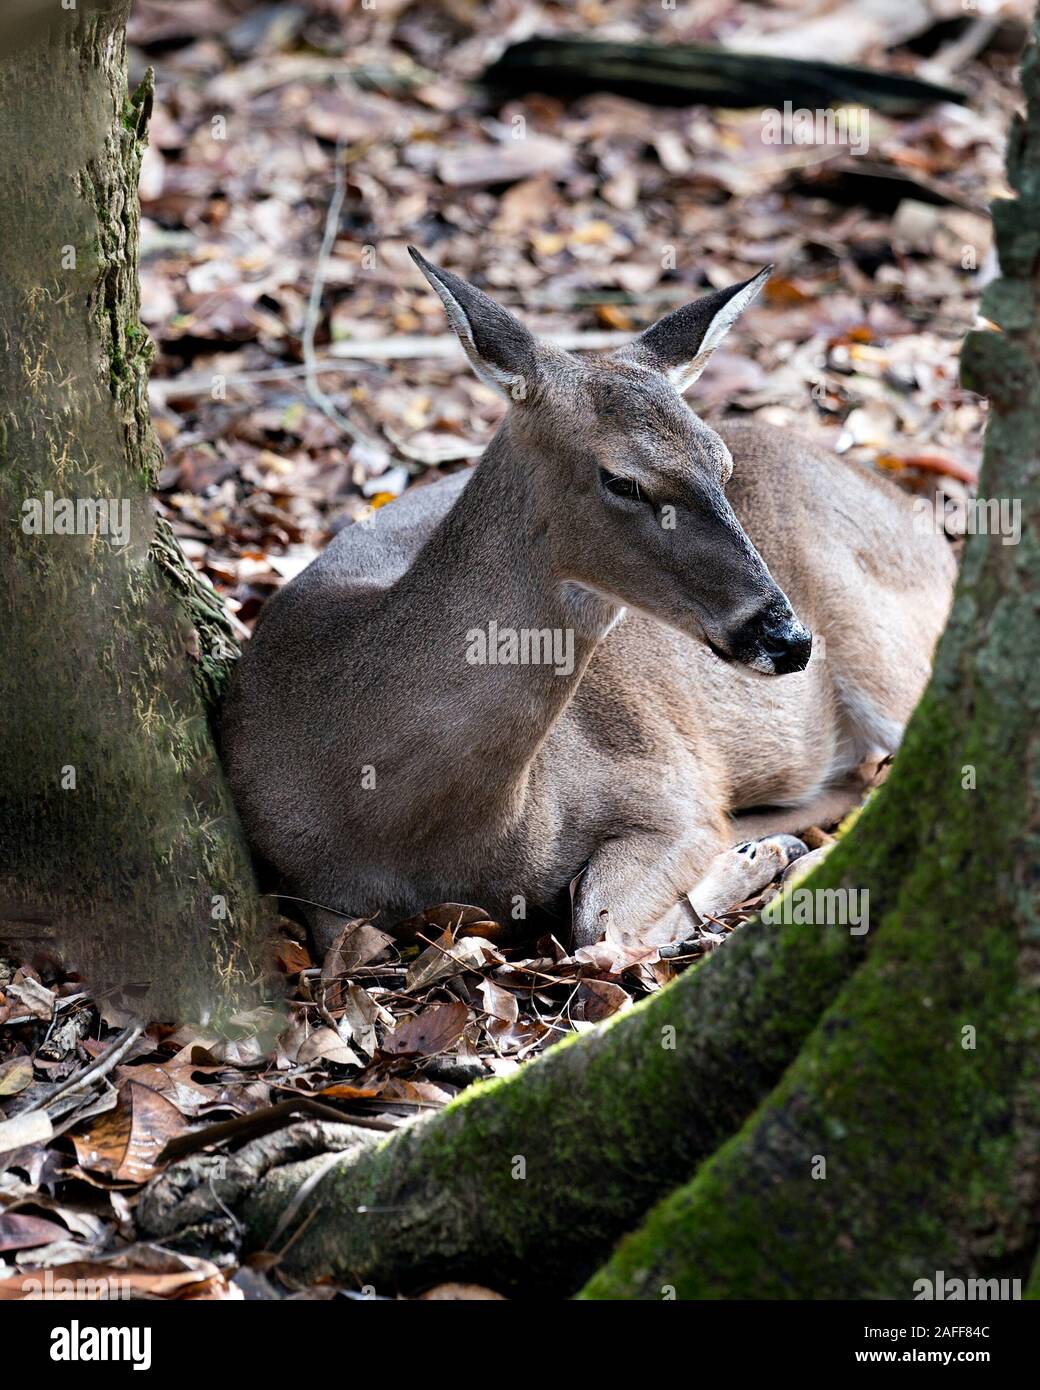 Deer animal White-tailed dear close-up profile view resting on the ground with  background, displaying head, ears, eye, mouth, nose, legs, brown fur i Stock Photo